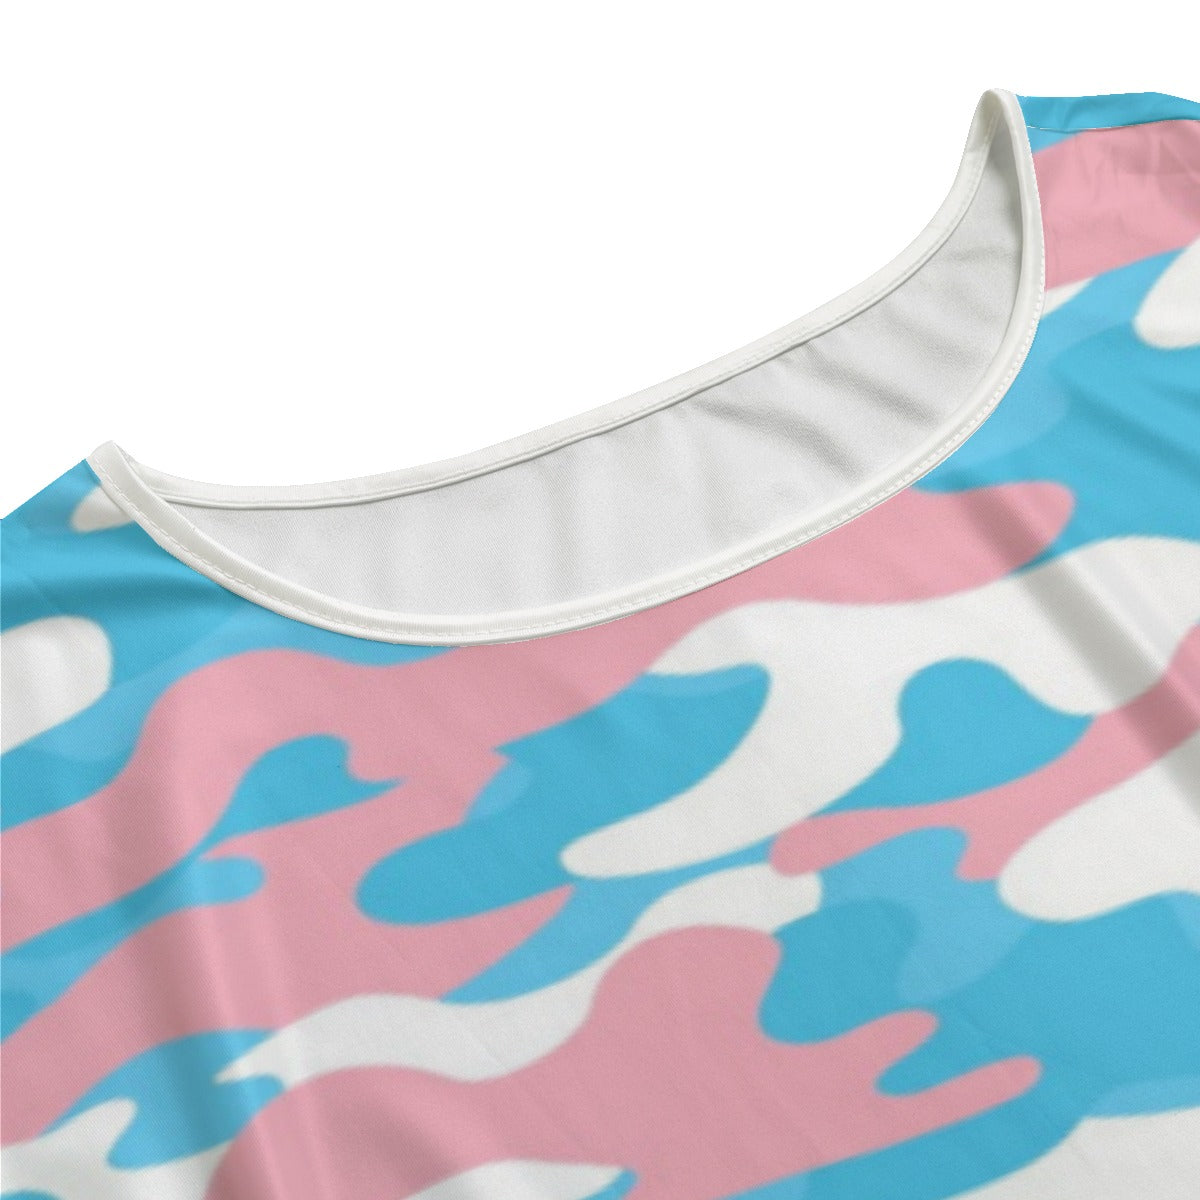 Trans Coloured Trans Pride Camouflage Long T-Shirt Style Nightdress